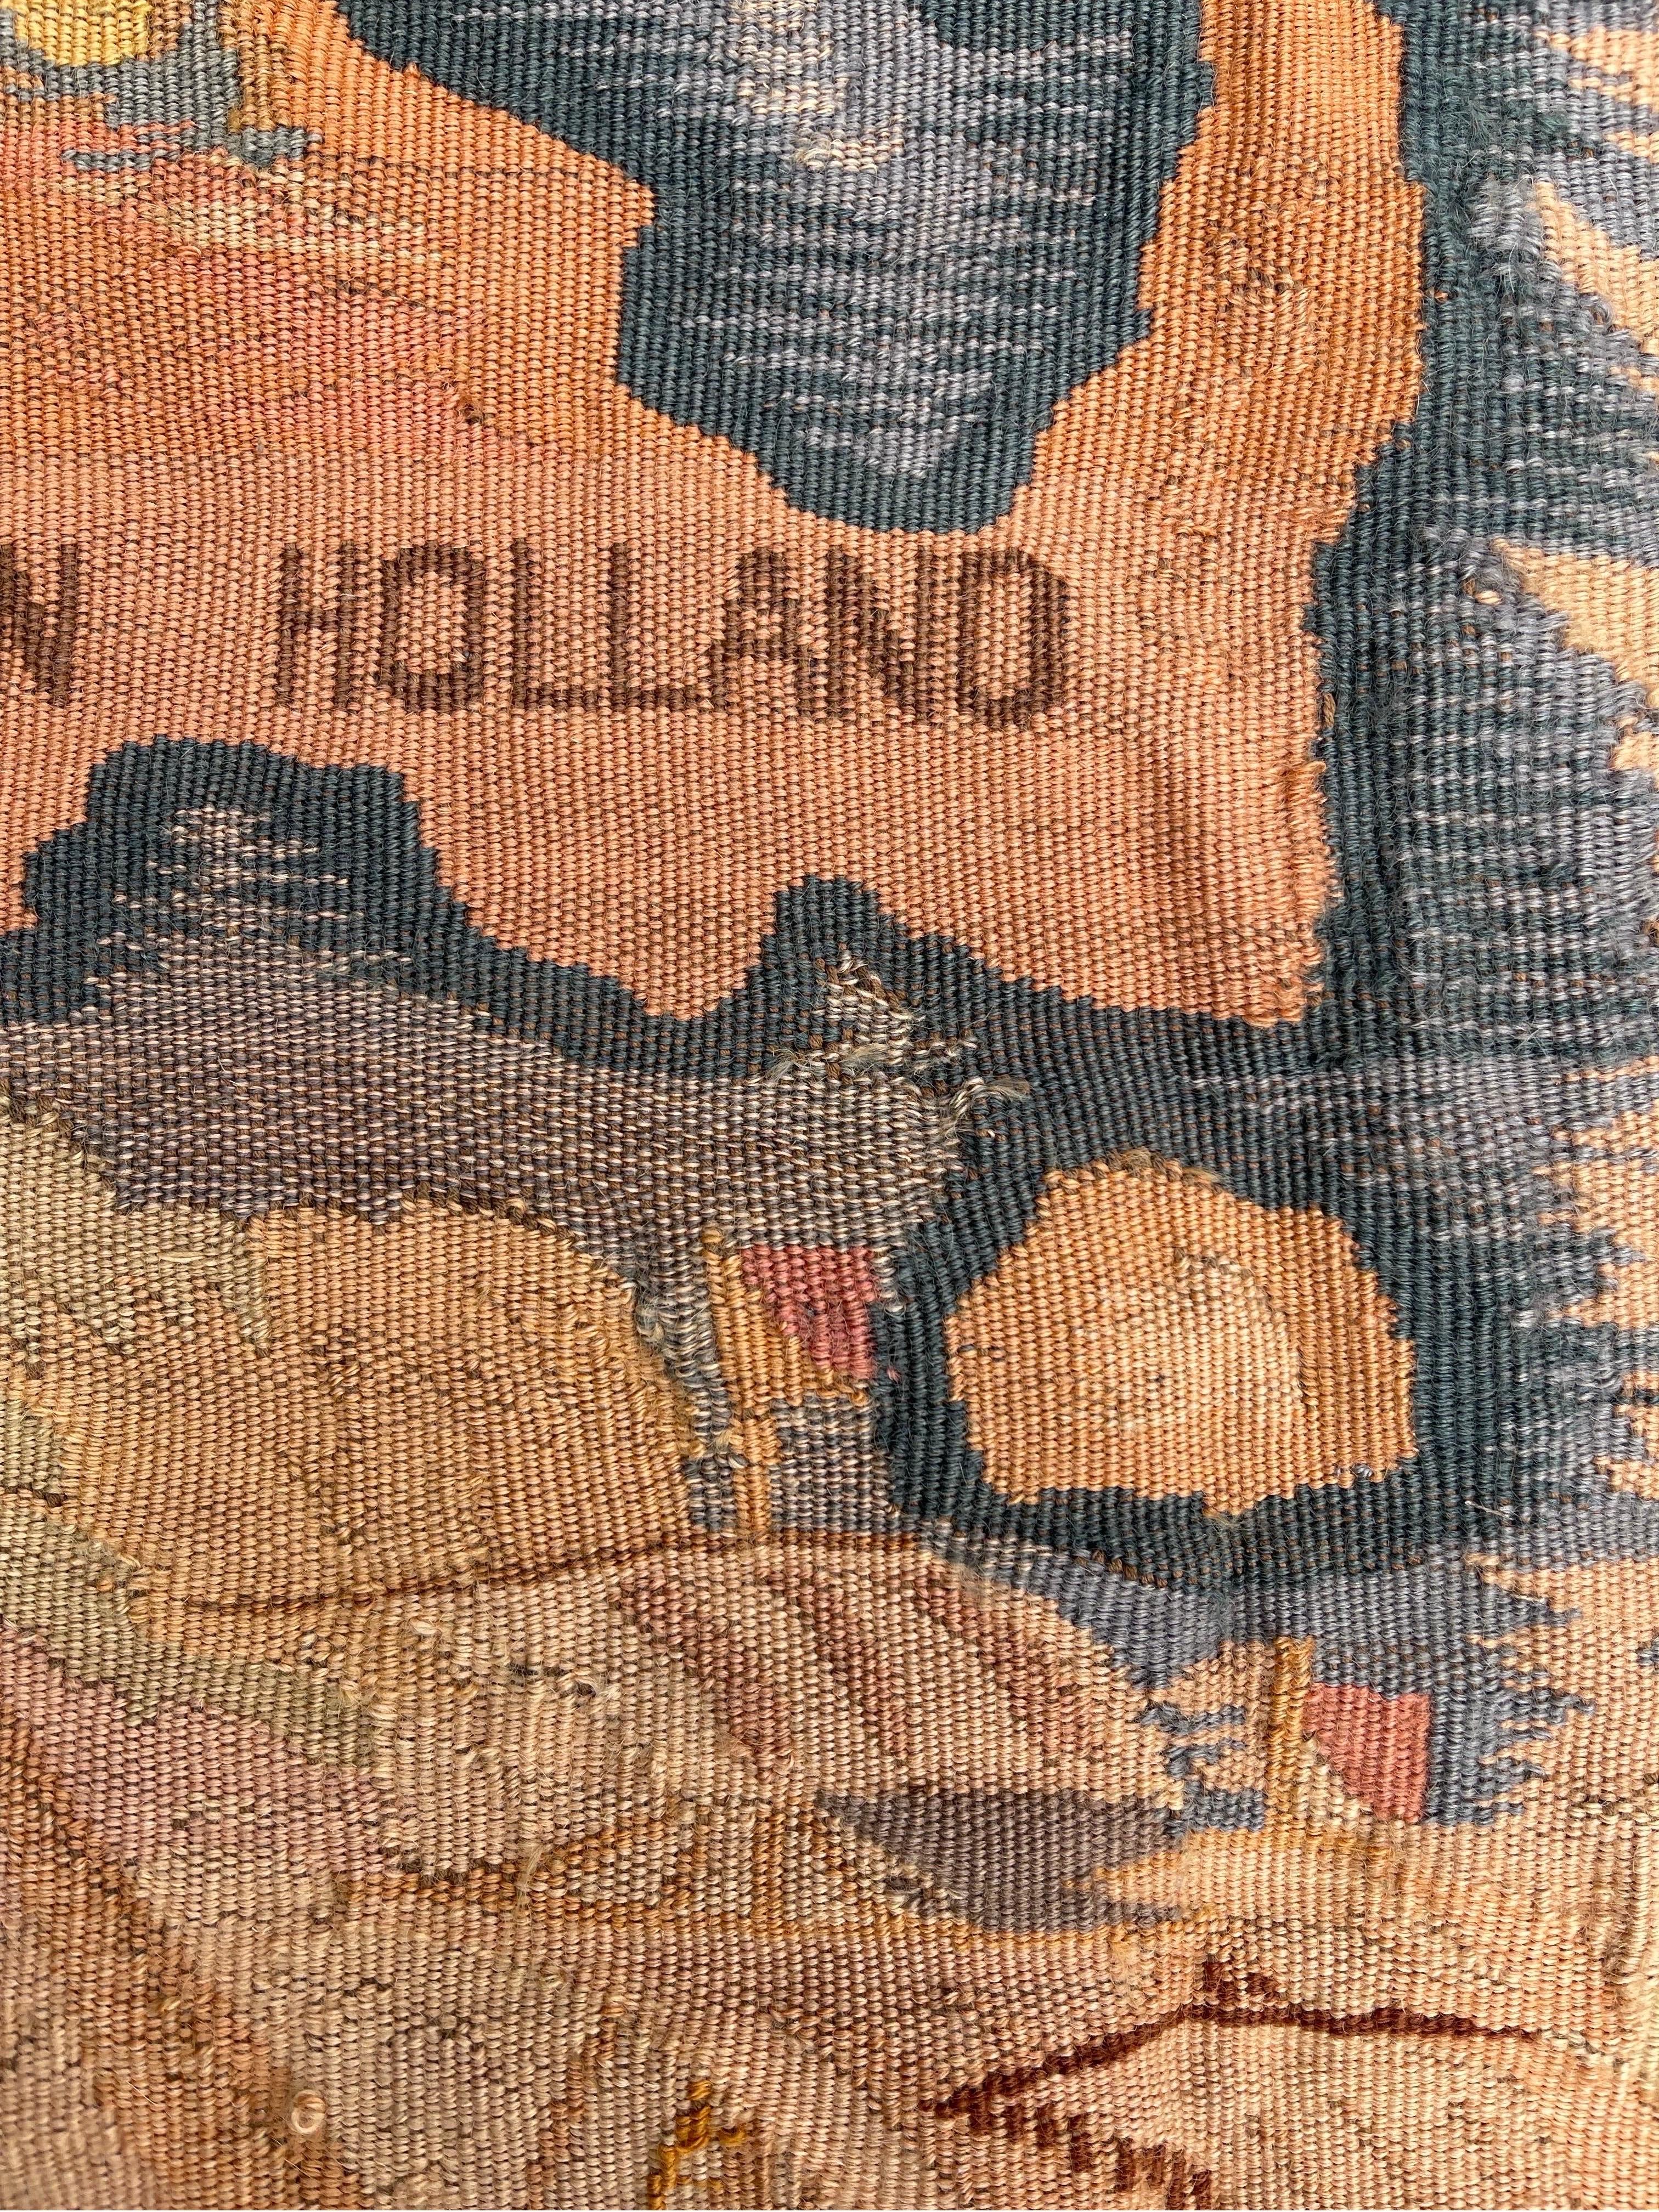 c.1900 Handwoven French Tapestry Map New Netherlands, Amsterdam, 1626 New York For Sale 7